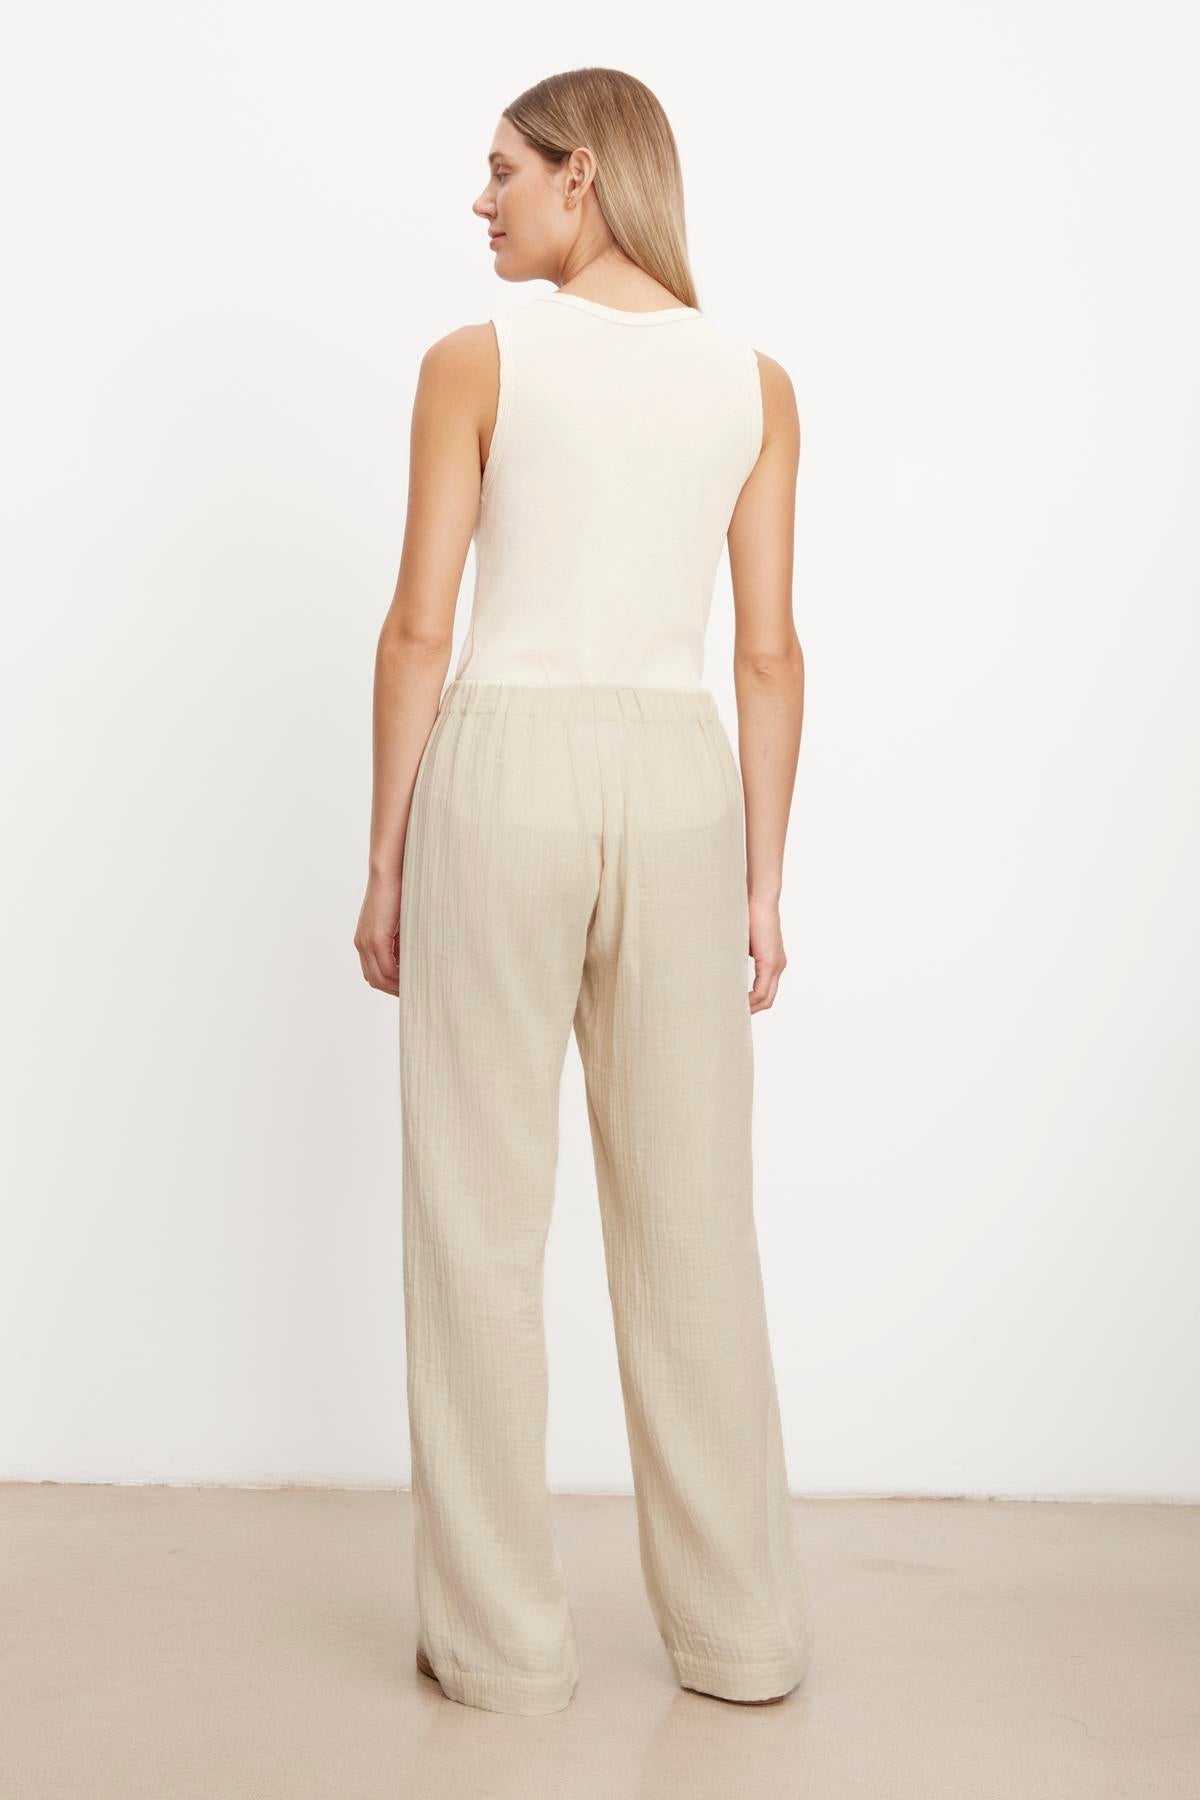 Woman standing in a neutral position wearing a sleeveless top and beige, lightweight Velvet by Graham & Spencer JERRY COTTON GAUZE PANT trousers with an elastic waistband against a plain background.-35755555651777